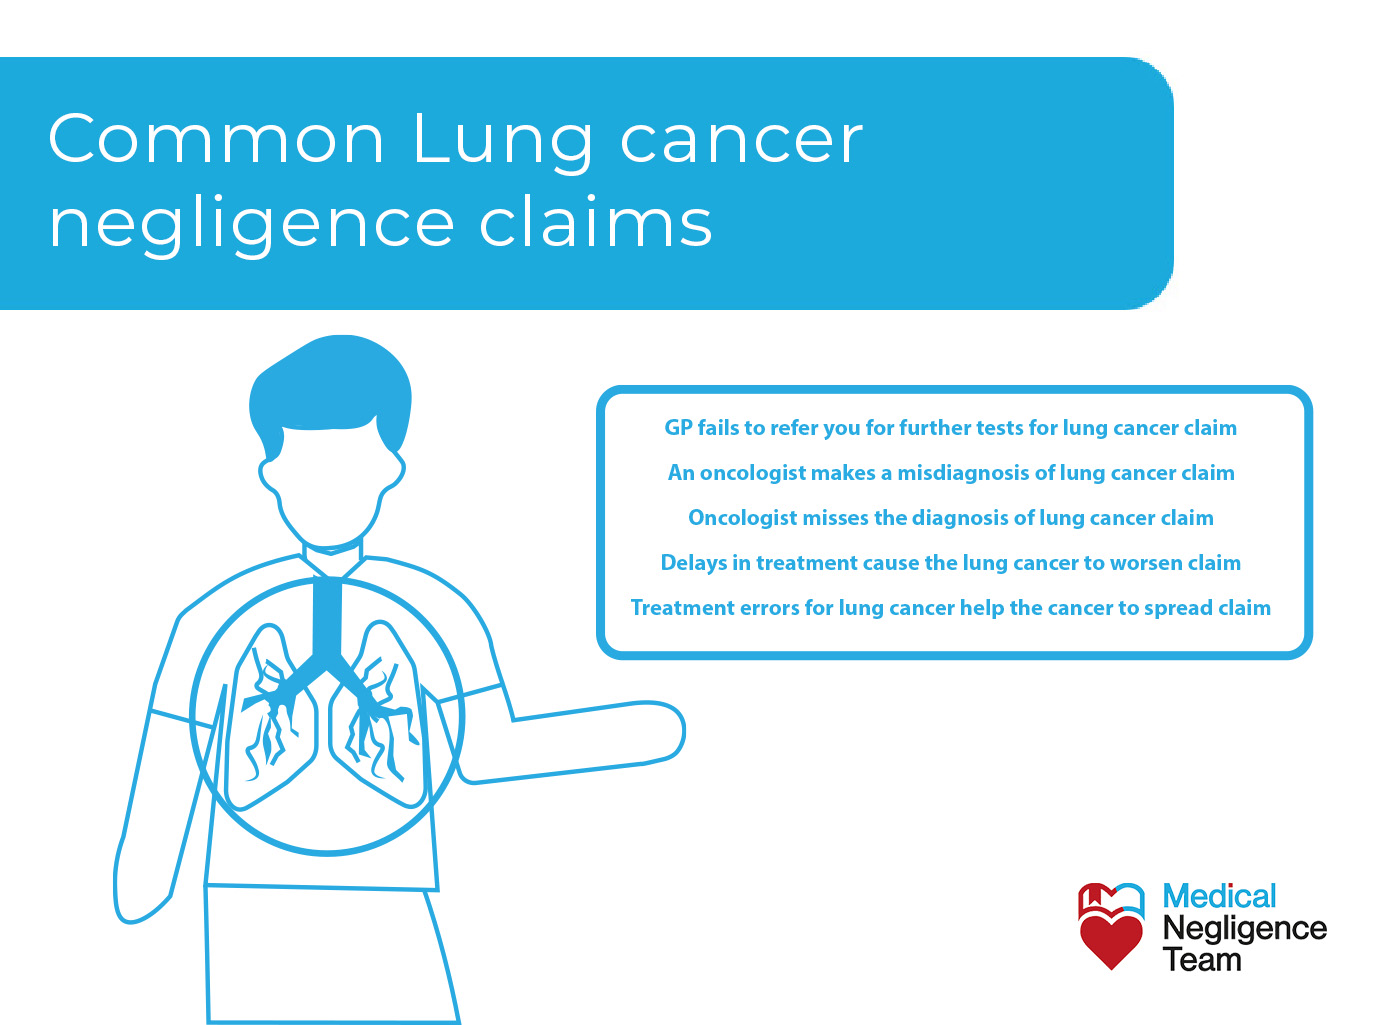 Common claims for lung cancer negligence